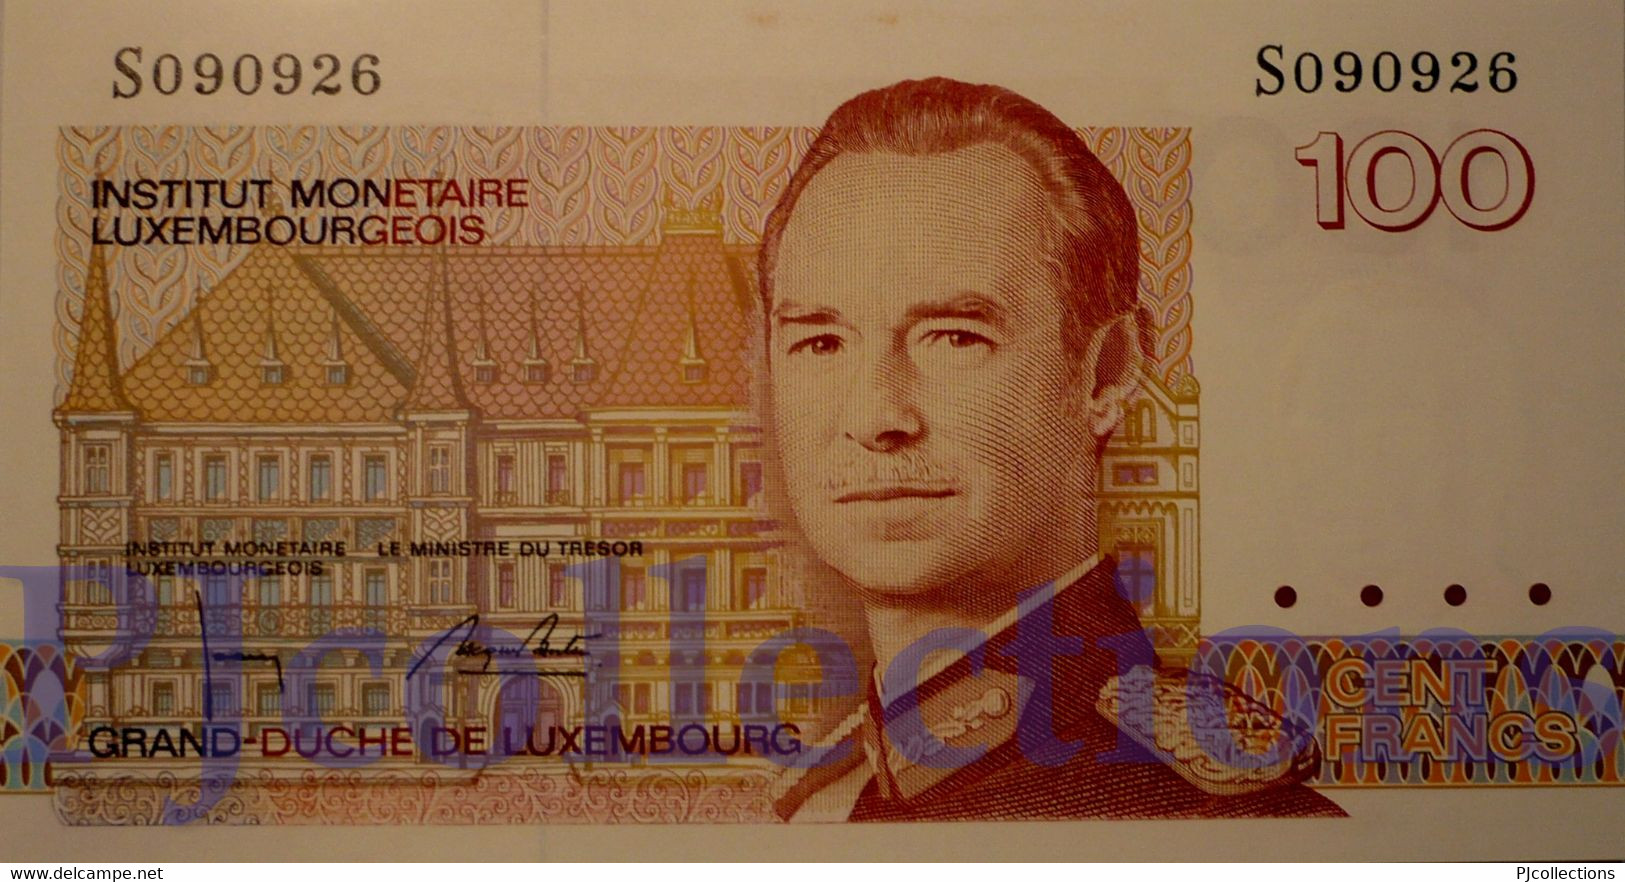 LUXEMBOURG 100 FRANCS 1986 PICK 58b UNC - Luxembourg